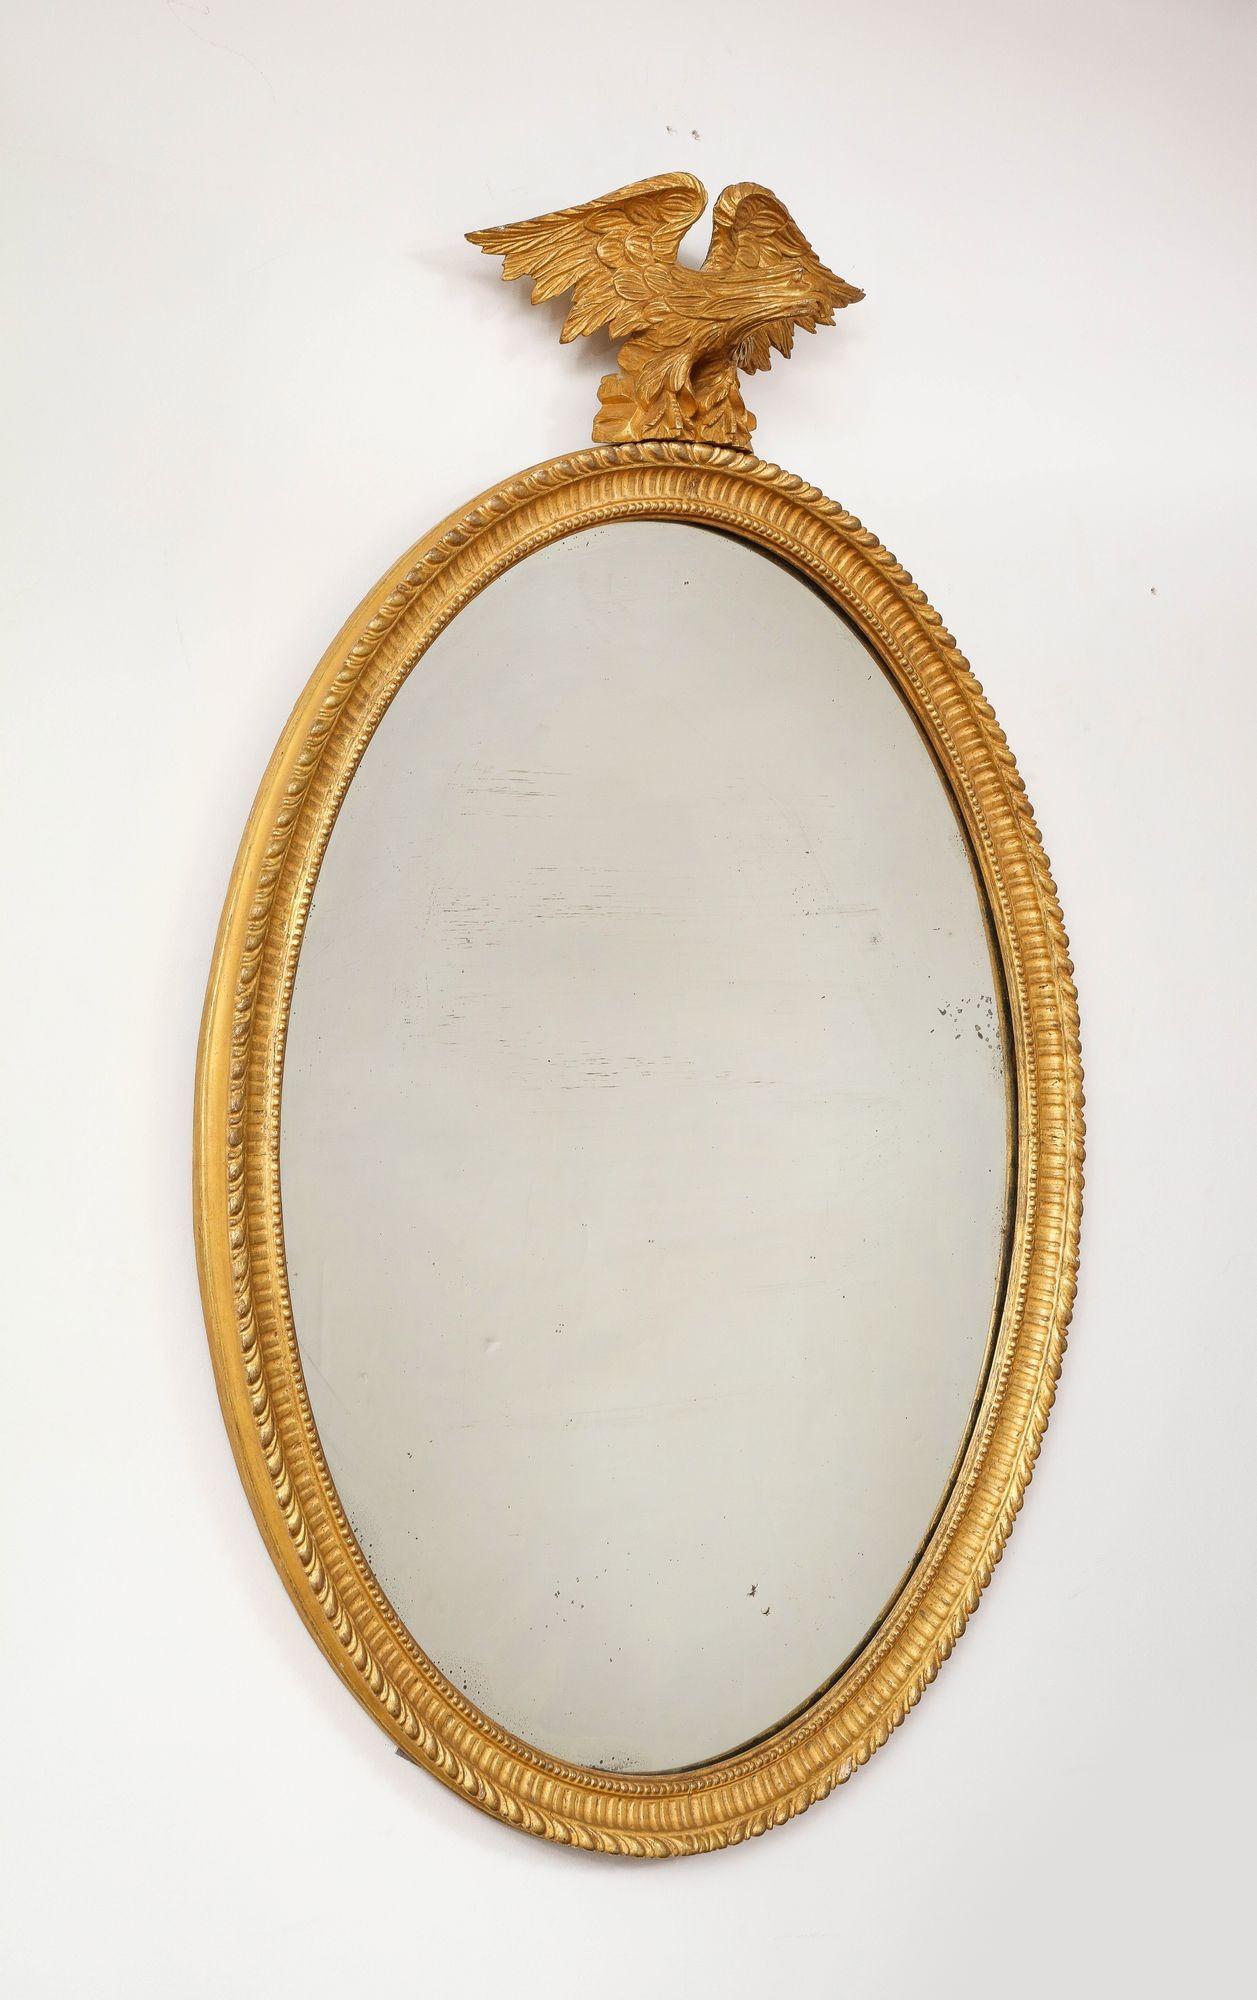 Fine George III oval giltwood classical mirror, the carved eagle crest standing on a rockwork base, surmounting a gadroon carved oval frame with fluting and beaded inner edge, retaining original mercury glass mirror plate.  Large scale and fine